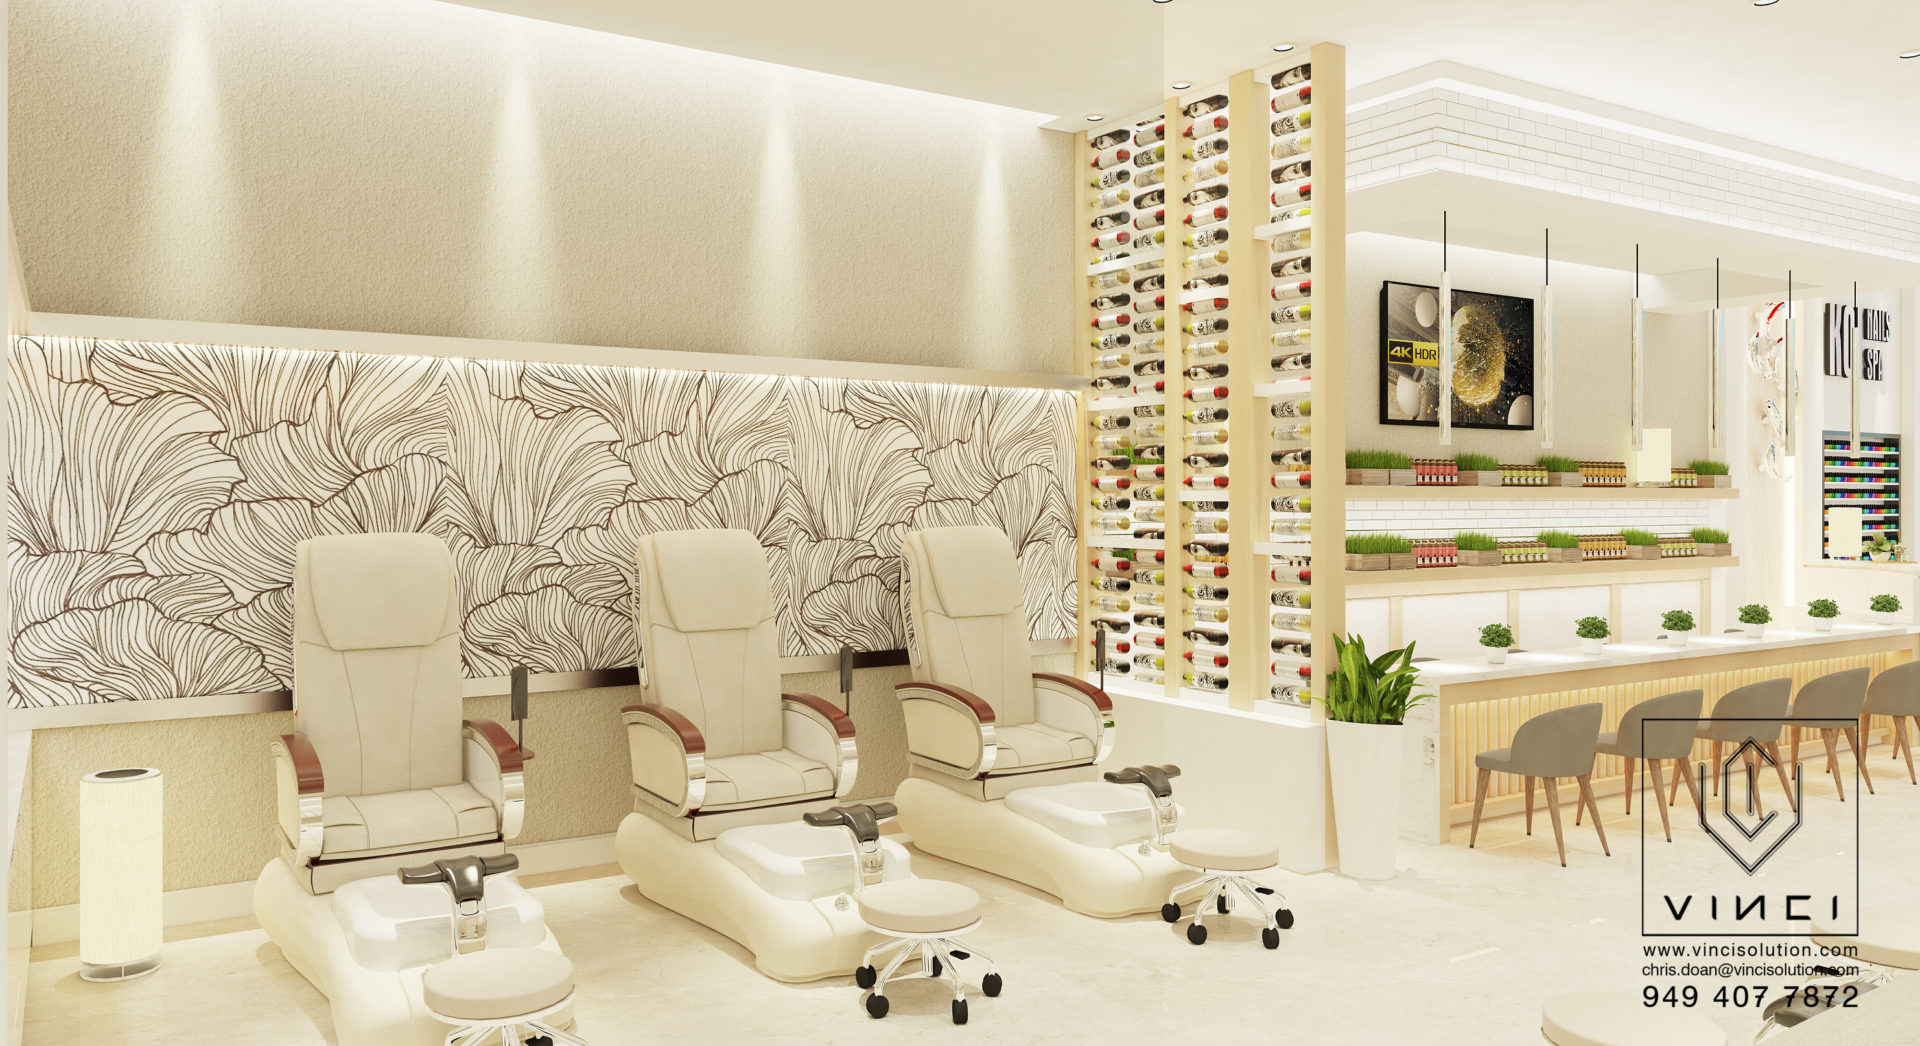 6. Industrial-Style Nail Salon Decor - wide 7